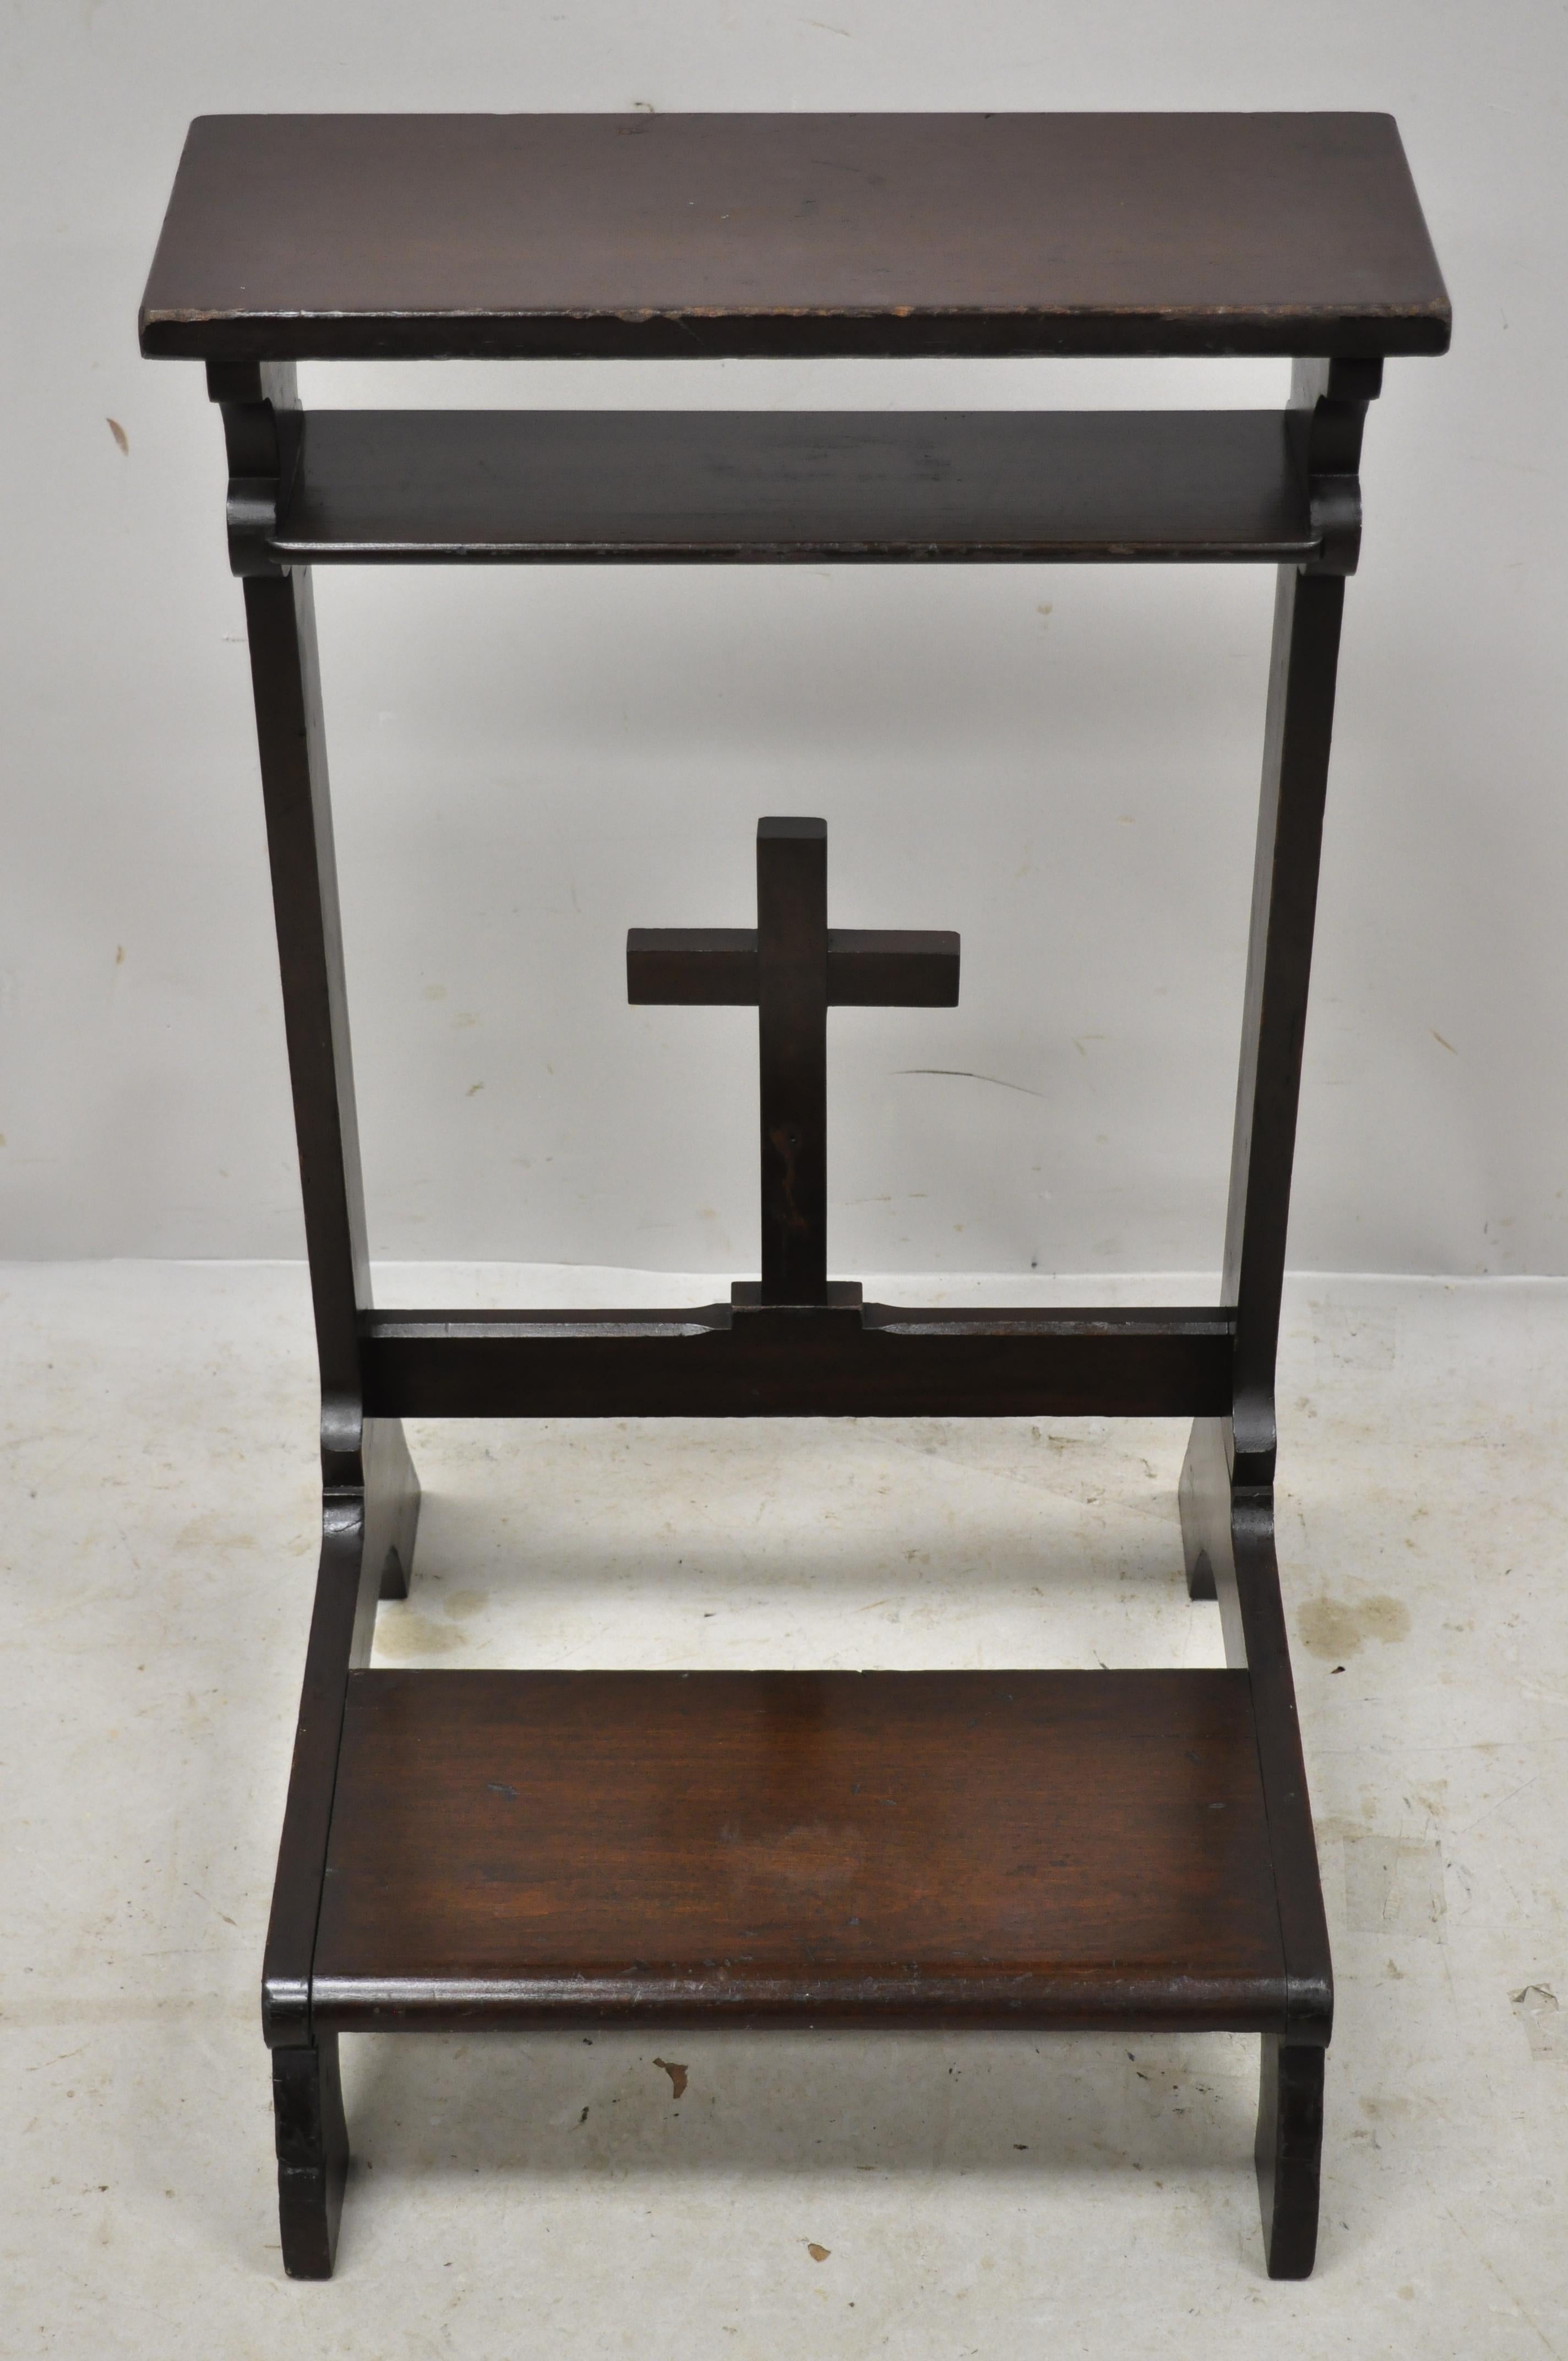 Vintage solid carved wood prayer bench kneeling kneeler with carved cross. Item features solid wood construction, very nice vintage item, great style and form, mid-20th century. Measurements: 32